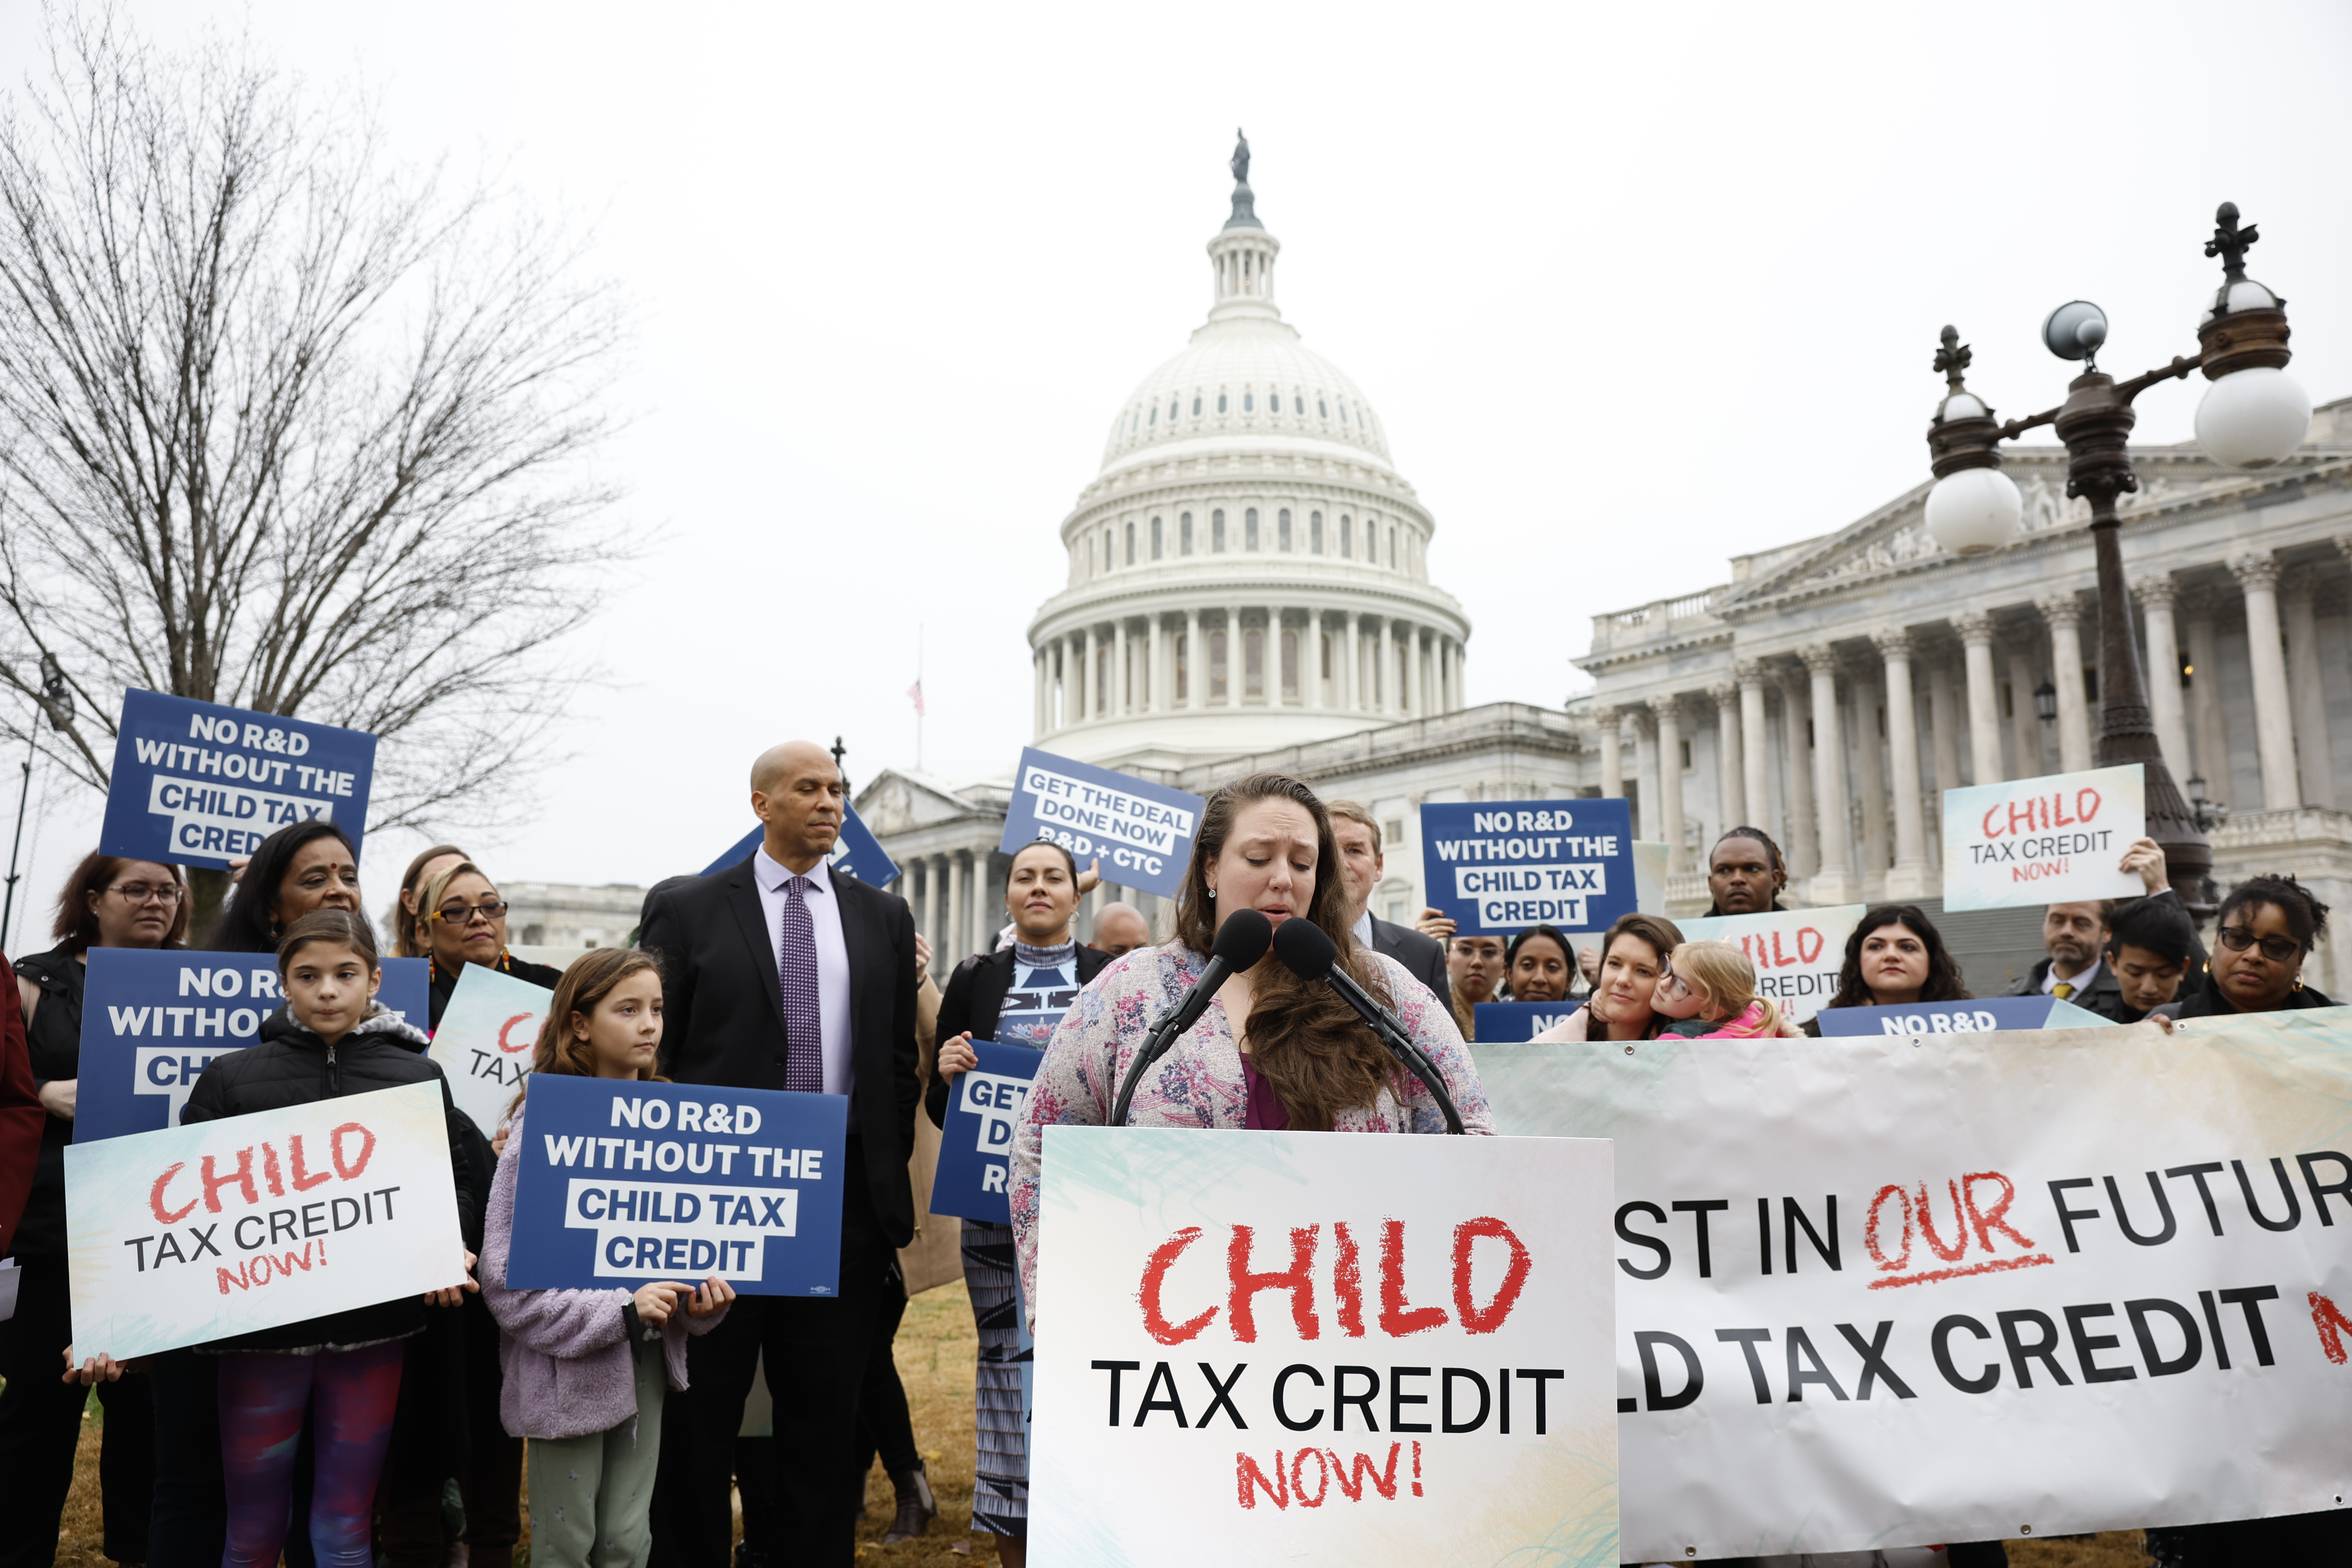 A group of people with signs referencing the child tax credit rally in front of the Capitol.